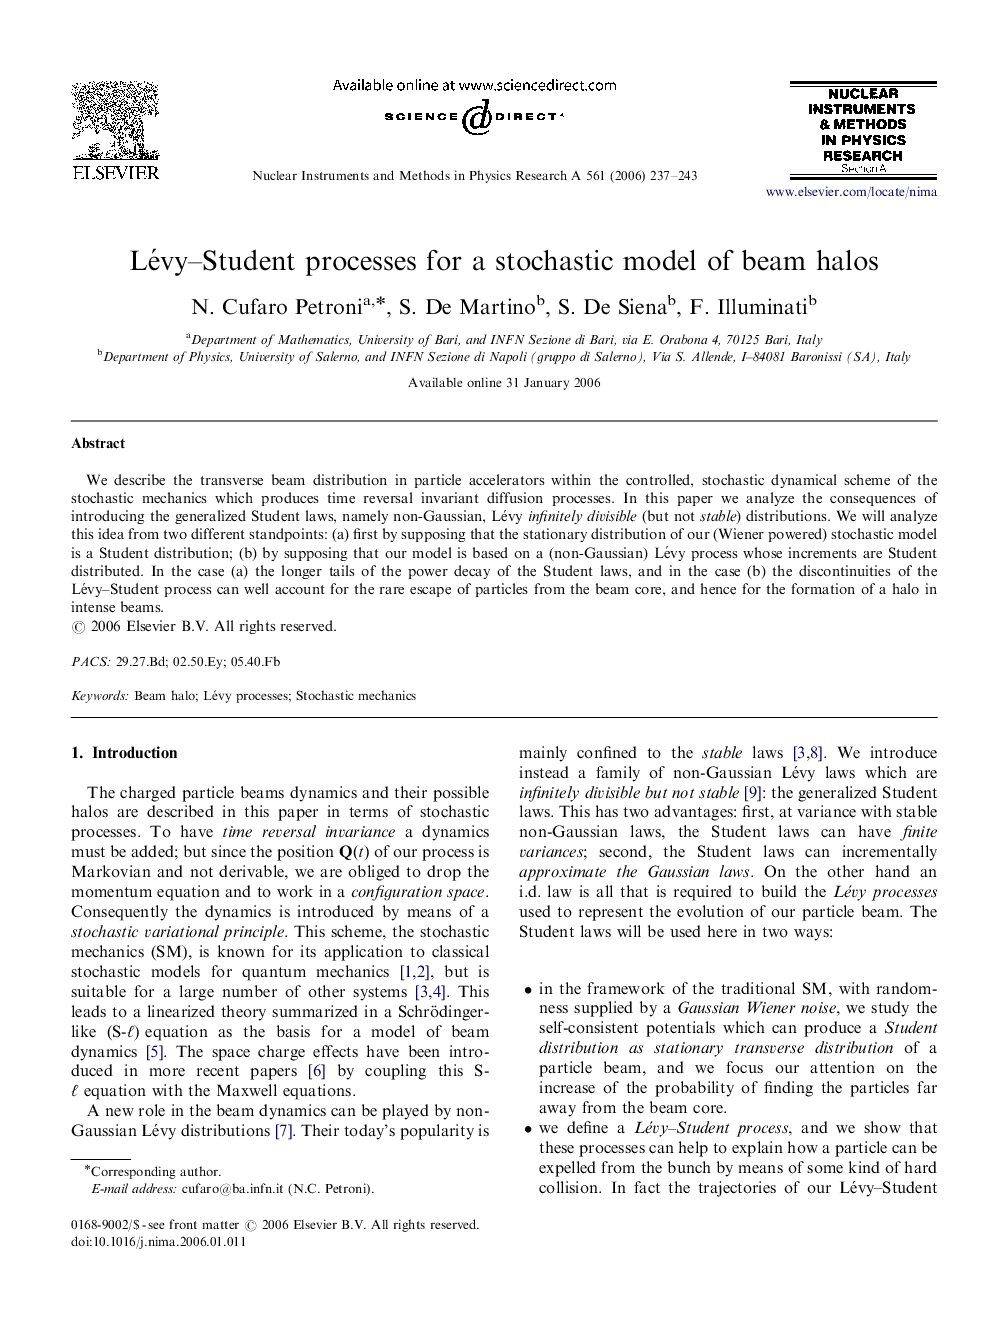 Lévy-Student processes for a stochastic model of beam halos